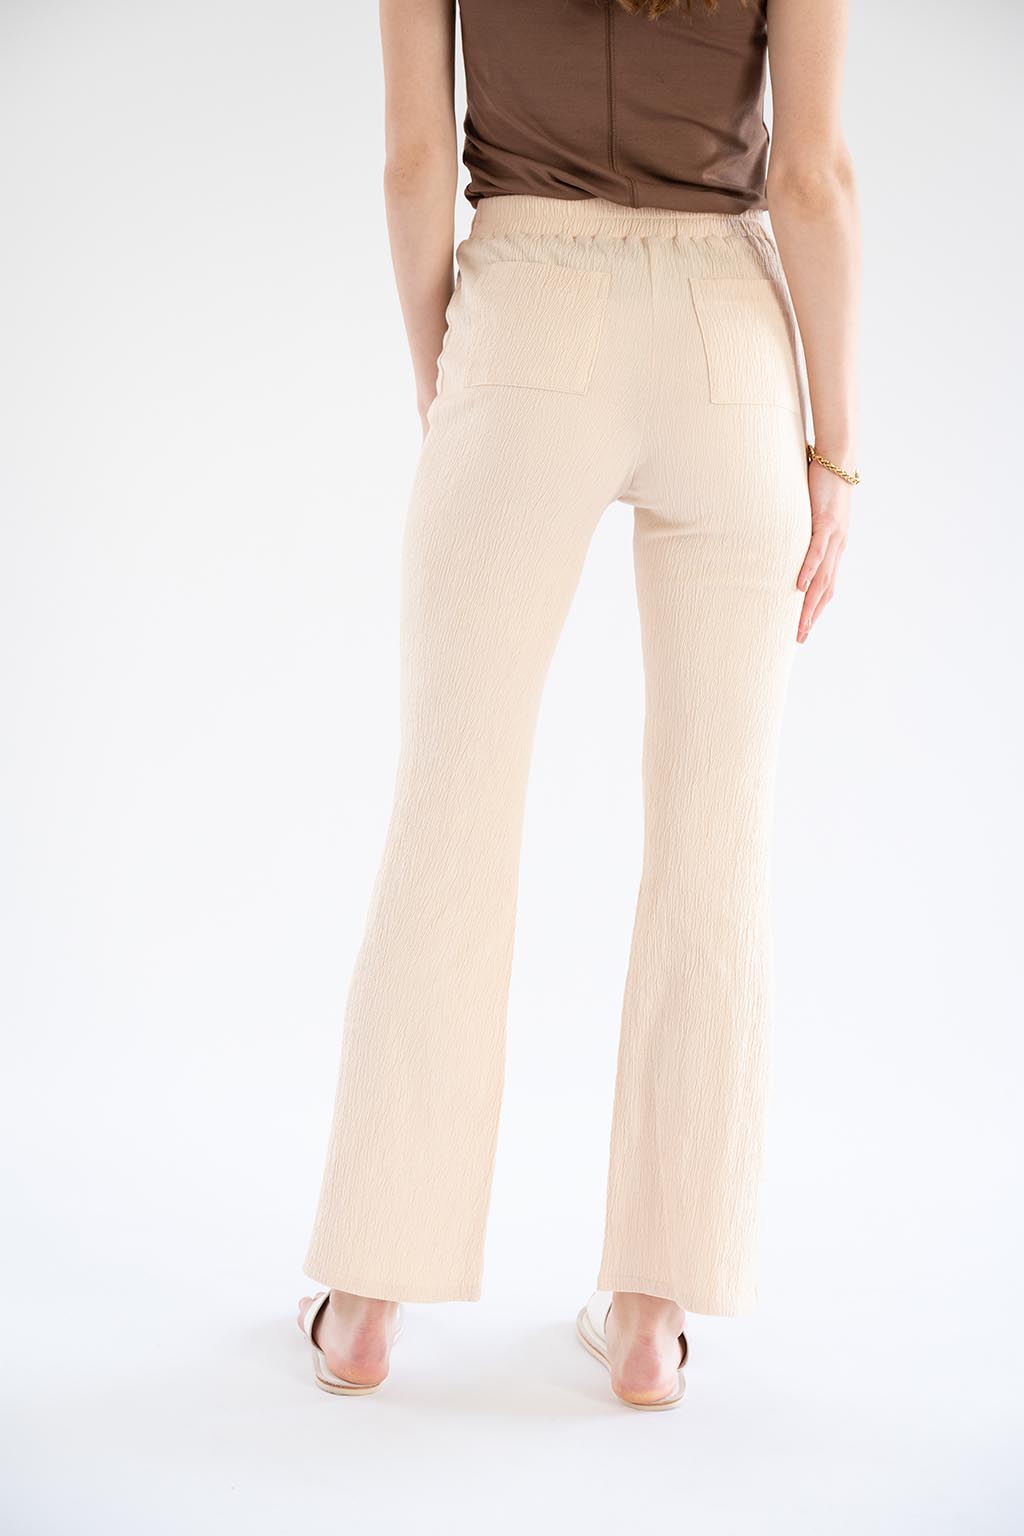 Waist String Relax Pants Ivory 5